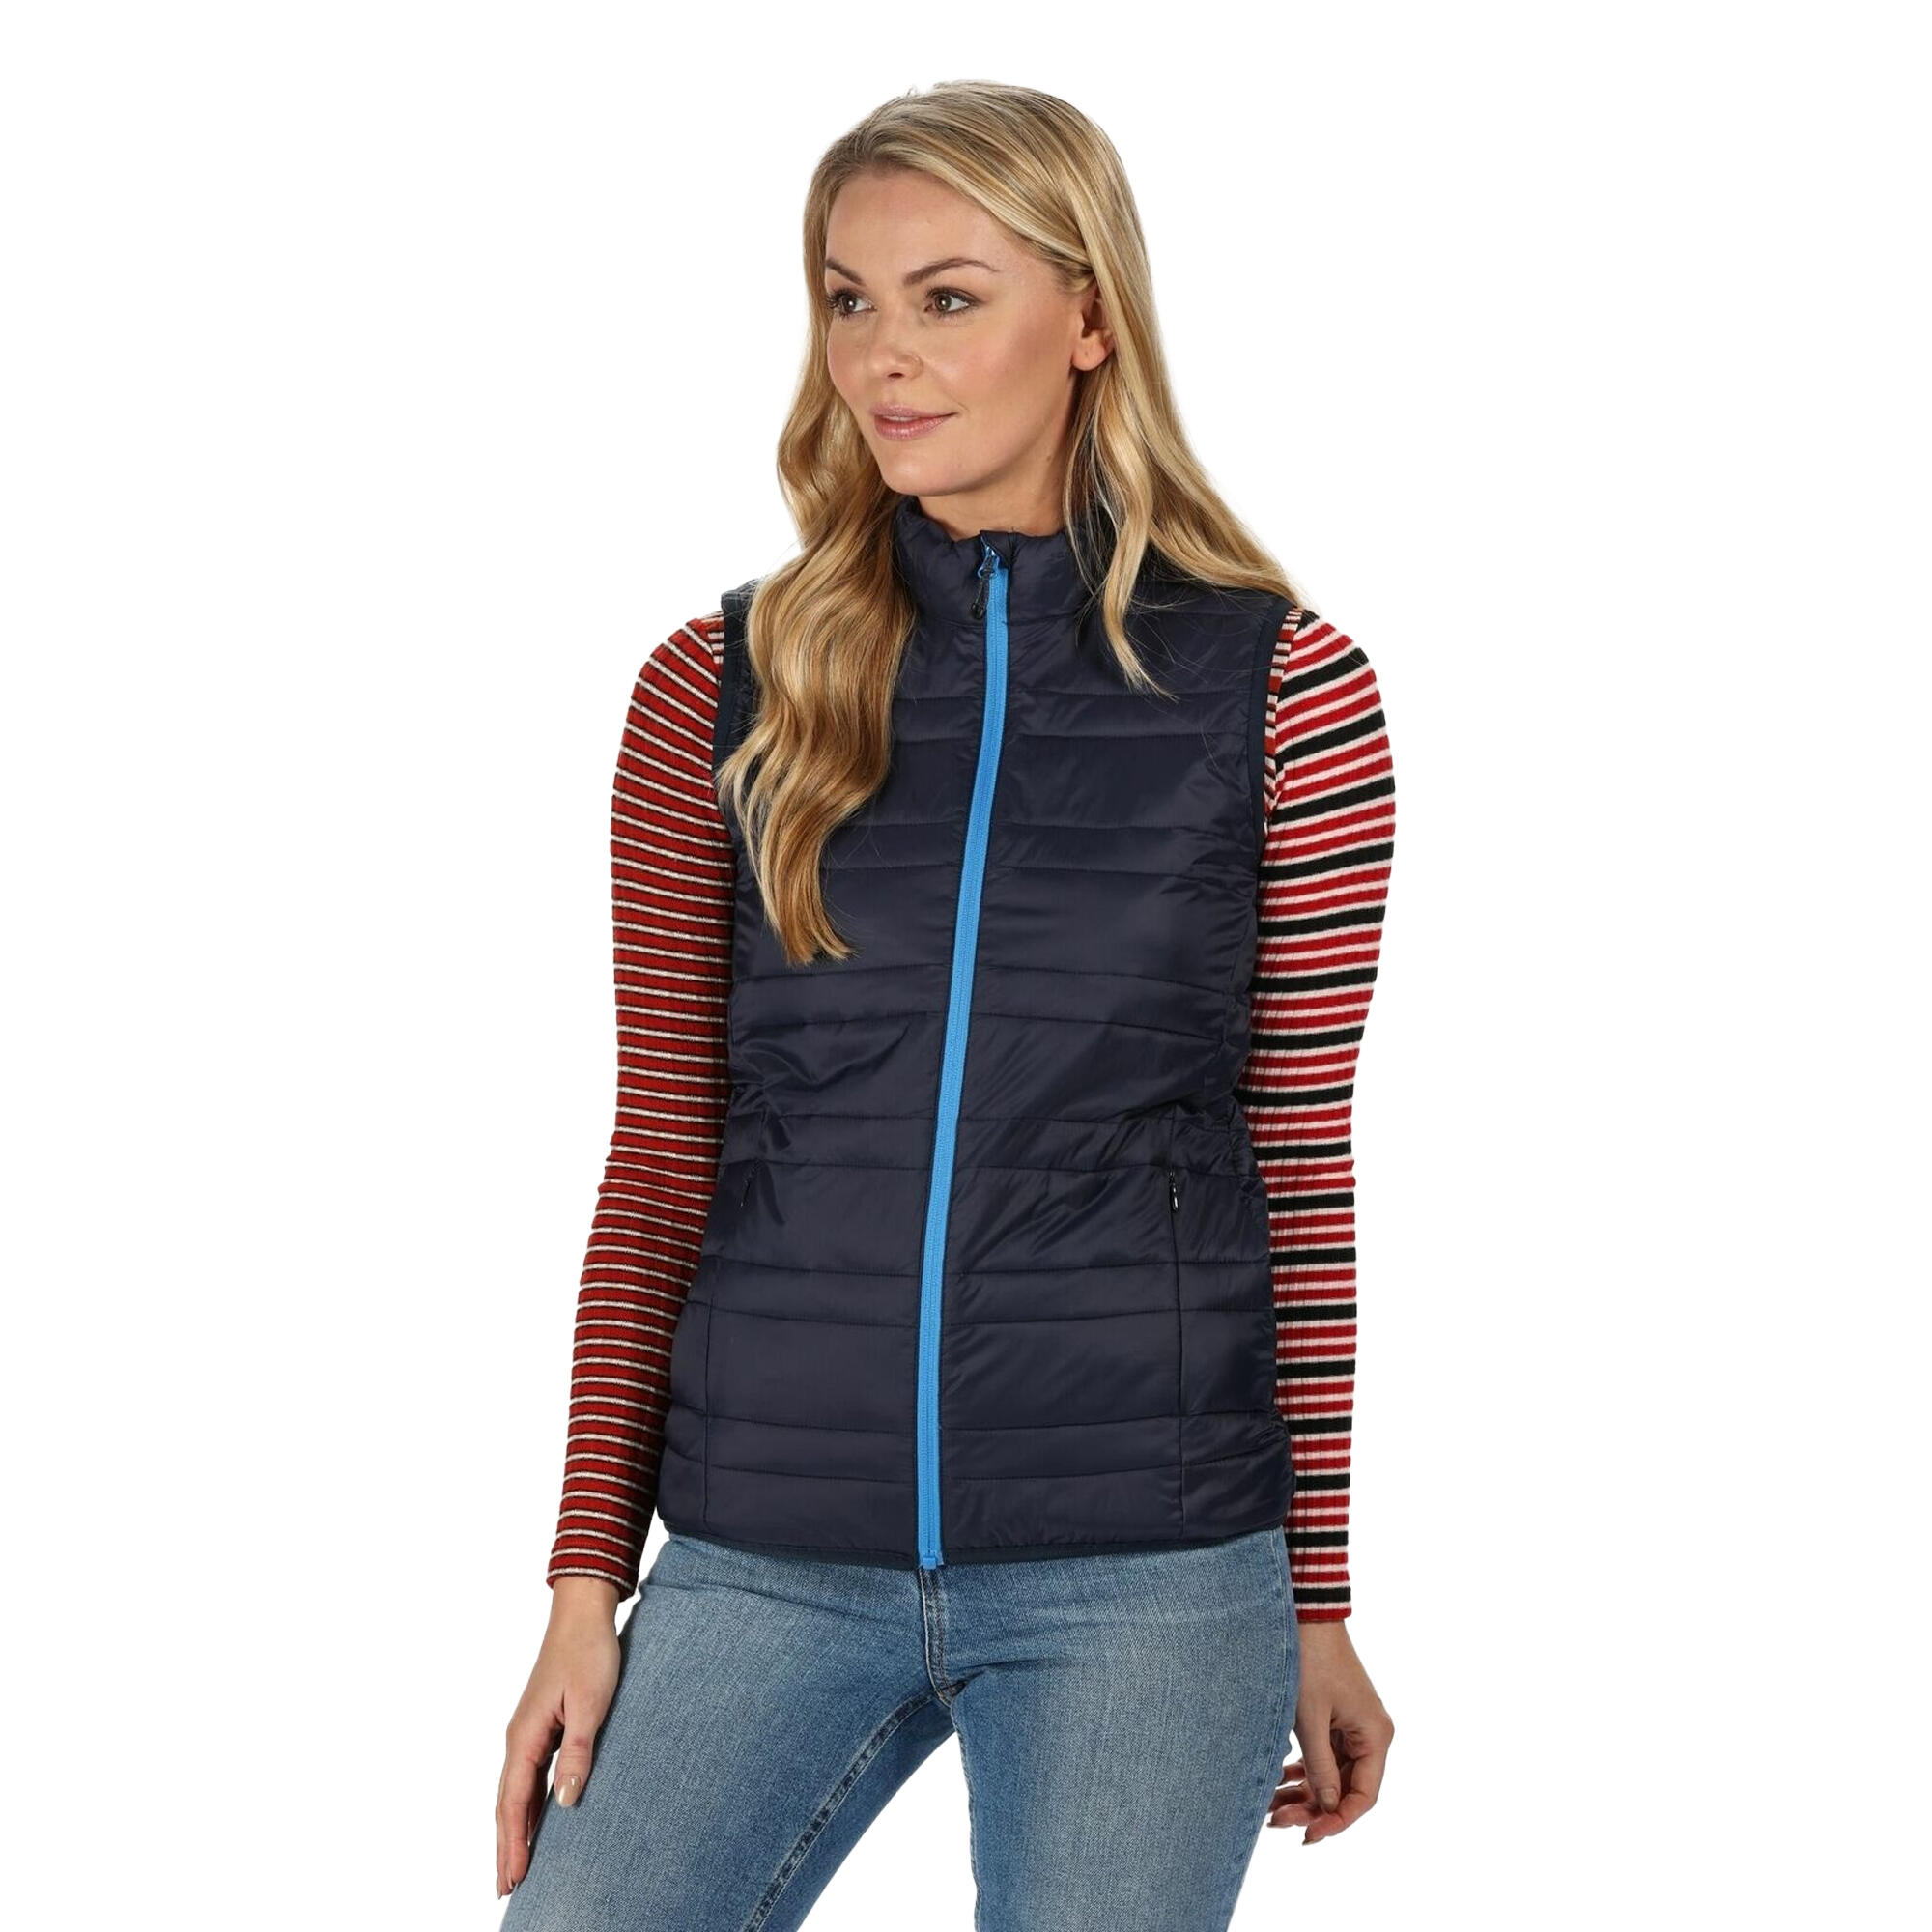 Professional Ladies/Womens Firedown Insulated Bodywarmer (Navy/French Blue) 3/5